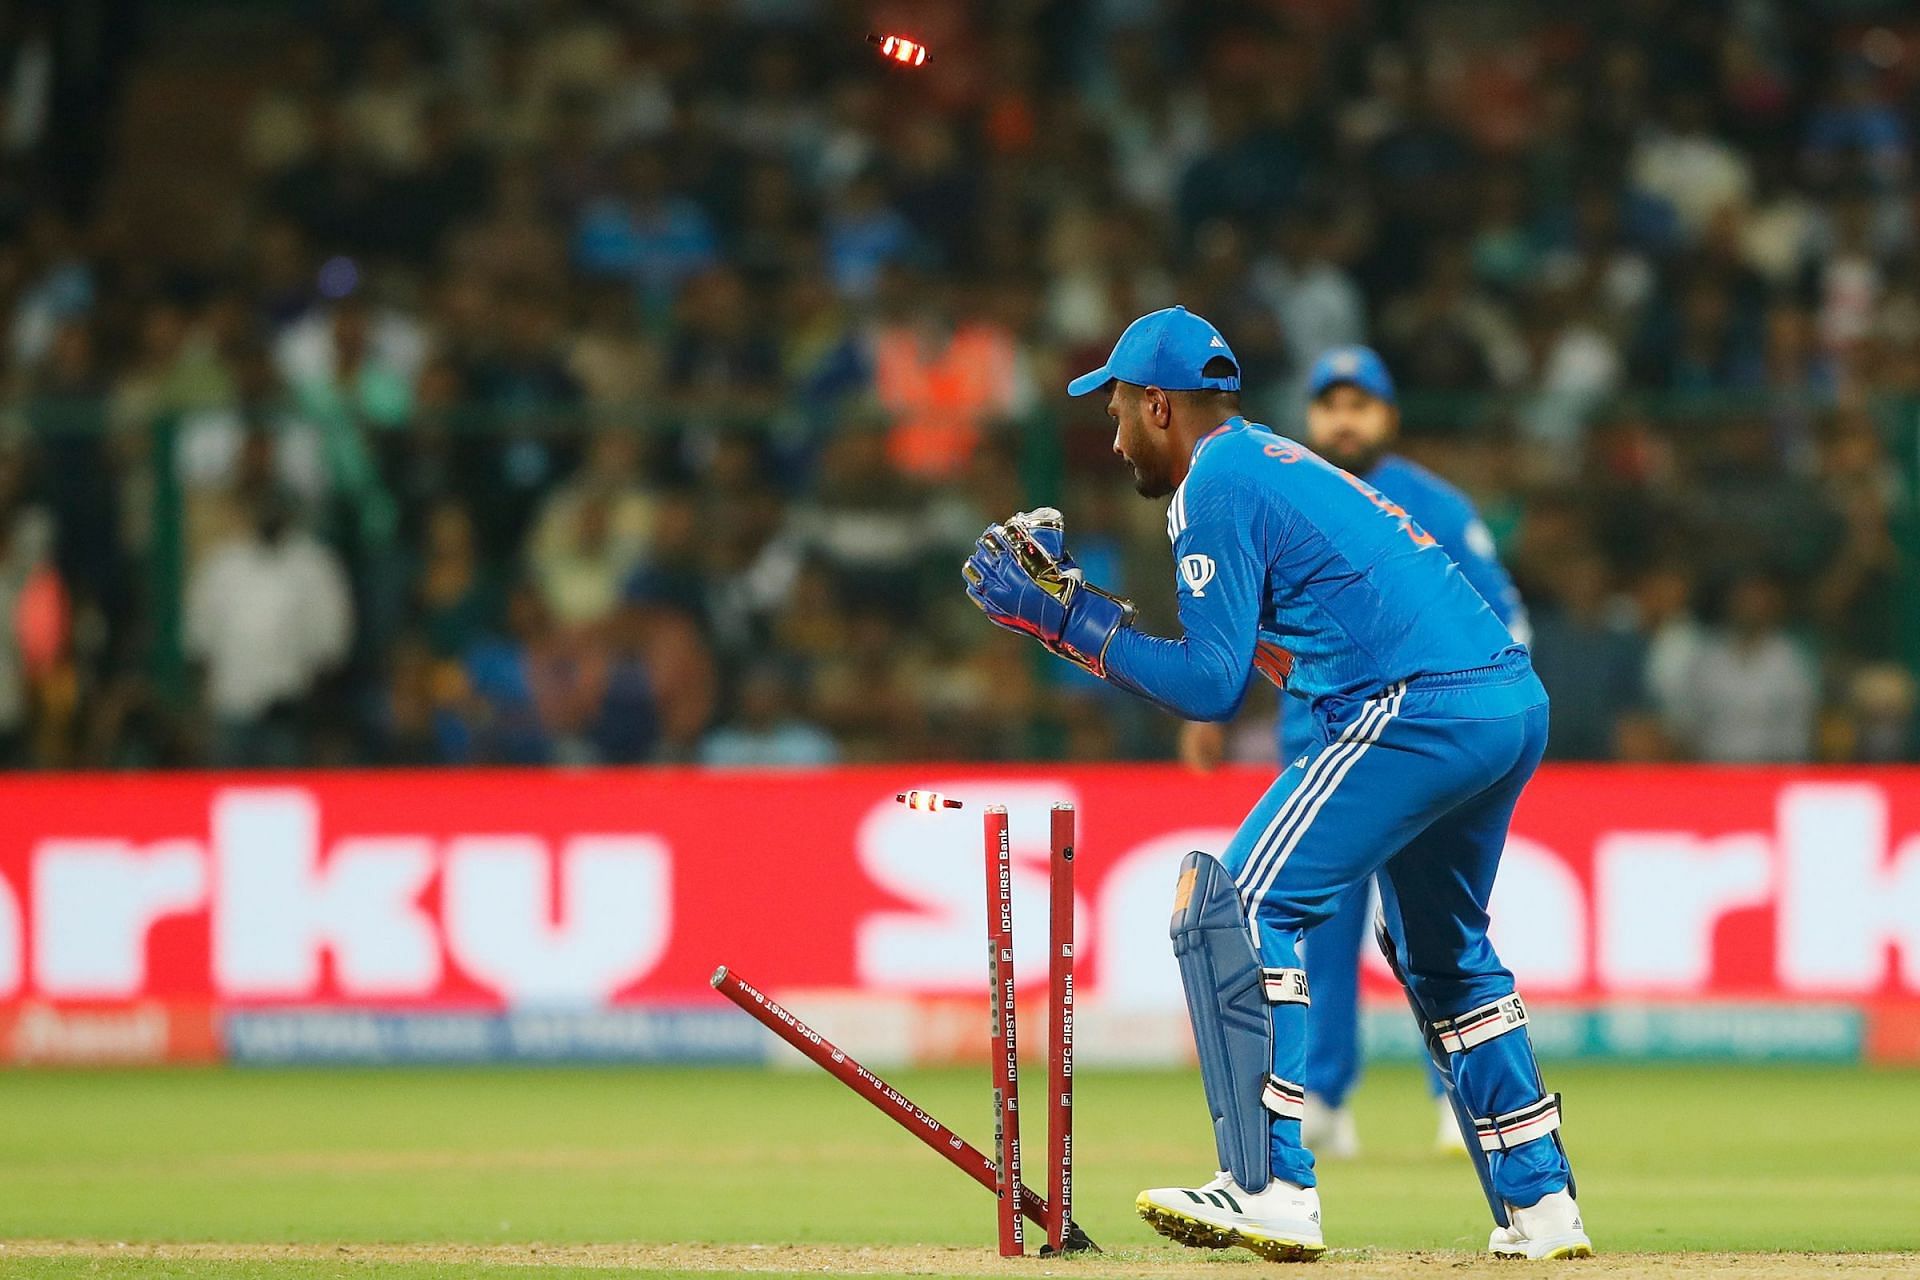 Sanju Samson bagged a first-ball duck after coming in at No. 5